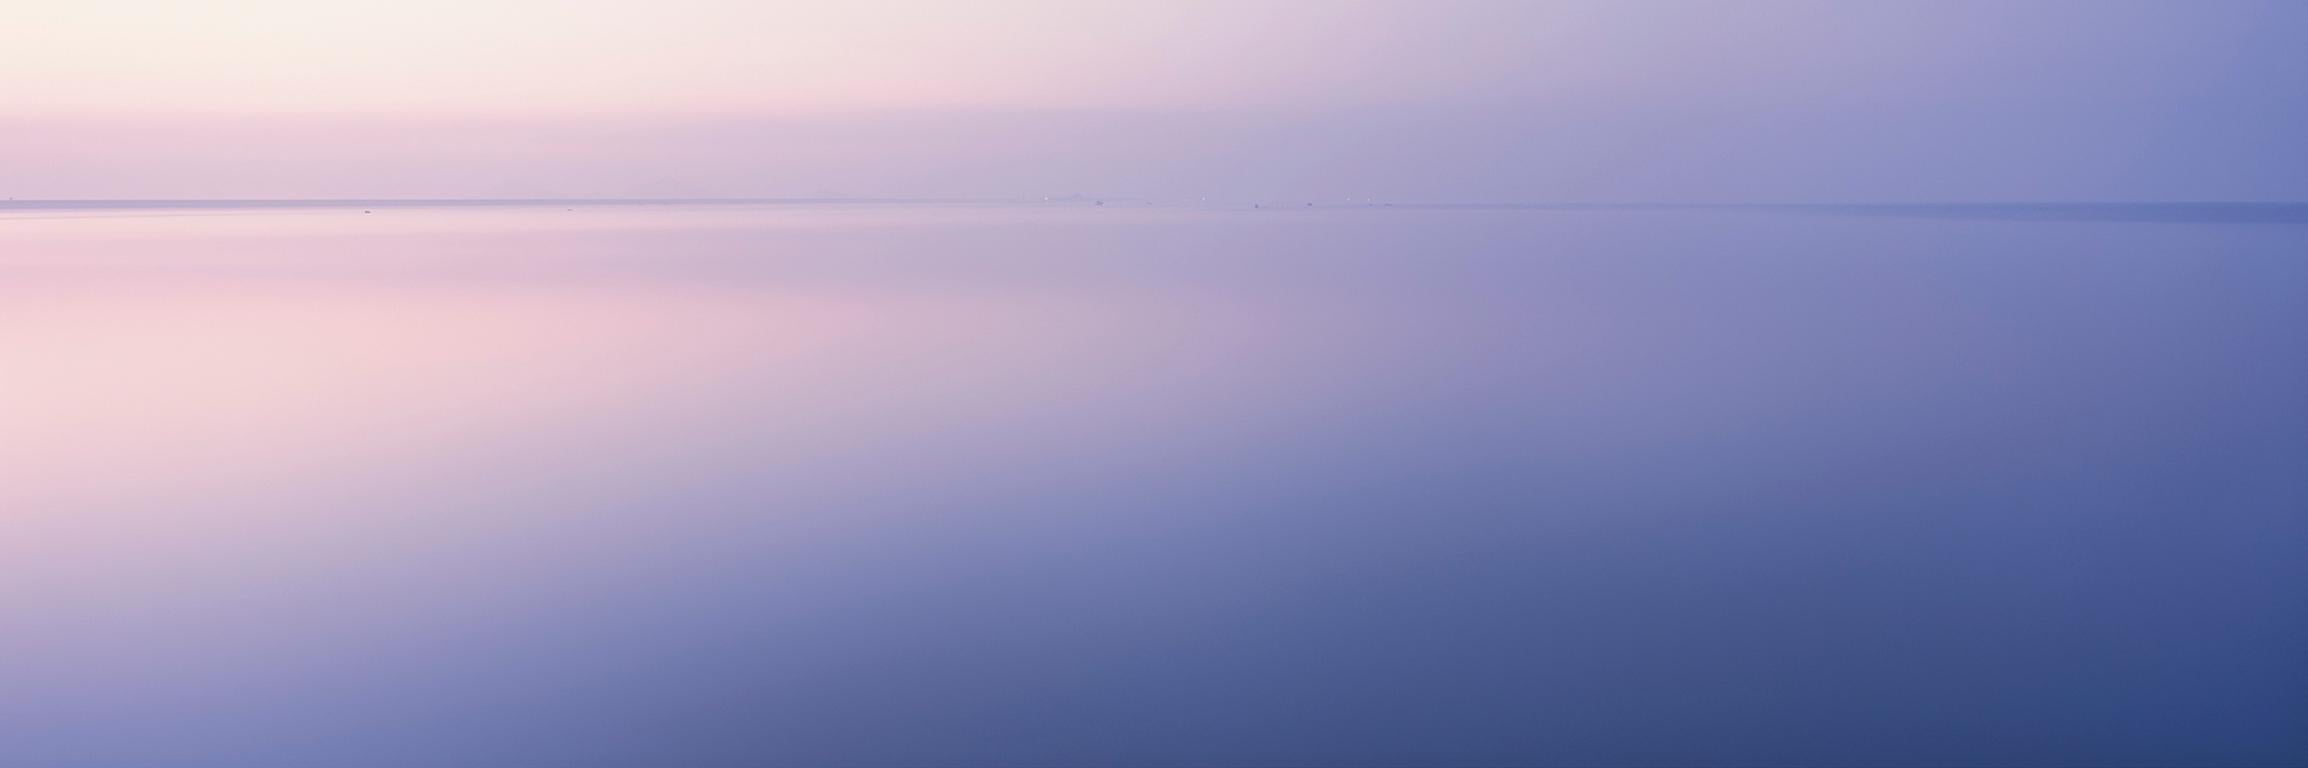 Young Jin Choi Color Photograph - Manghae, Purple Mist (Photograph, Print, Sunset, Peaceful Waters, South Korea)